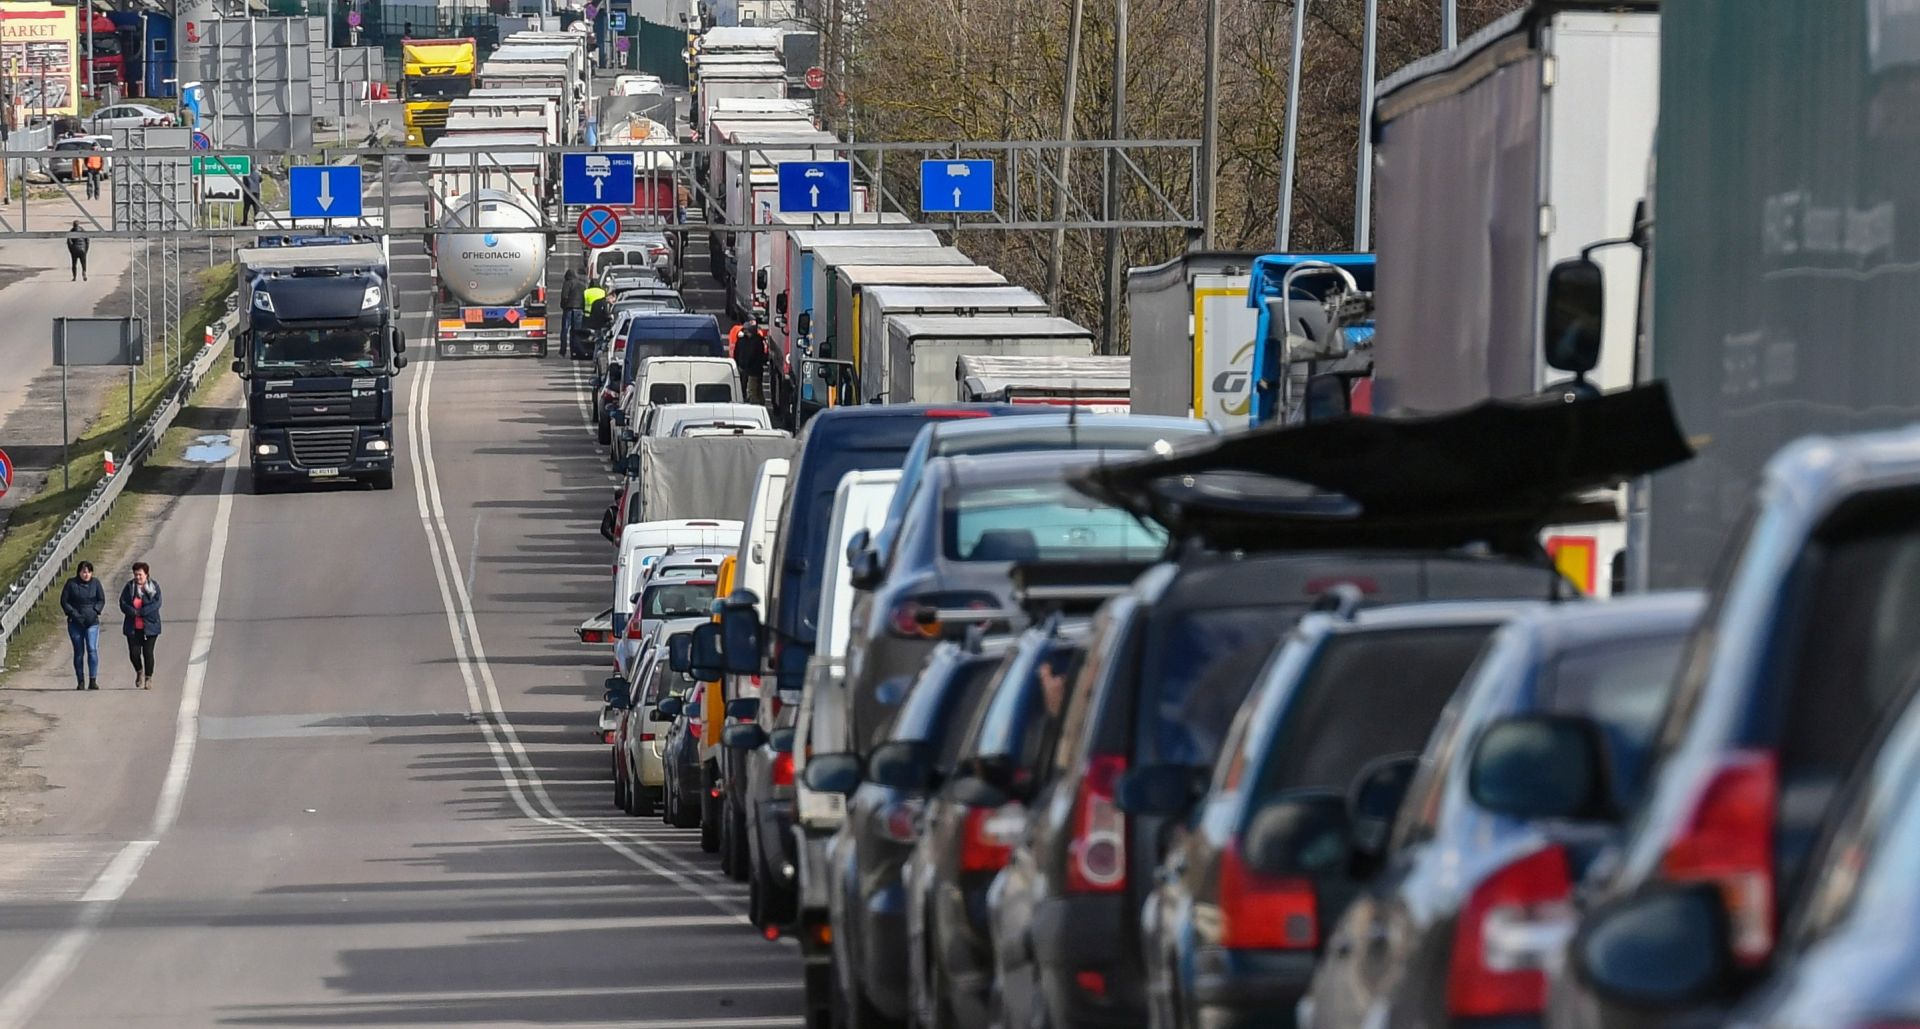 epa08294250 Queues at the border crossing with Ukraine in Dorohusk, Poland, 14 March 2020. Poland will ban foreigners from entering the country from 15 March 2020 and impose a 14-day quarantine on its citizens returning home in order to halt the wide spread of coronavirus COVID-19, Prime Minister Prime Minister Mateusz Morawiecki said on 13 March 2020. Several European countries have closed borders, schools as well as public facilities, and have cancelled most major sports and entertainment events in order to prevent the spread of the SARS-CoV-2 coronavirus causing the Covid-19 disease.  EPA/WOJTEK JARGILO POLAND OUT